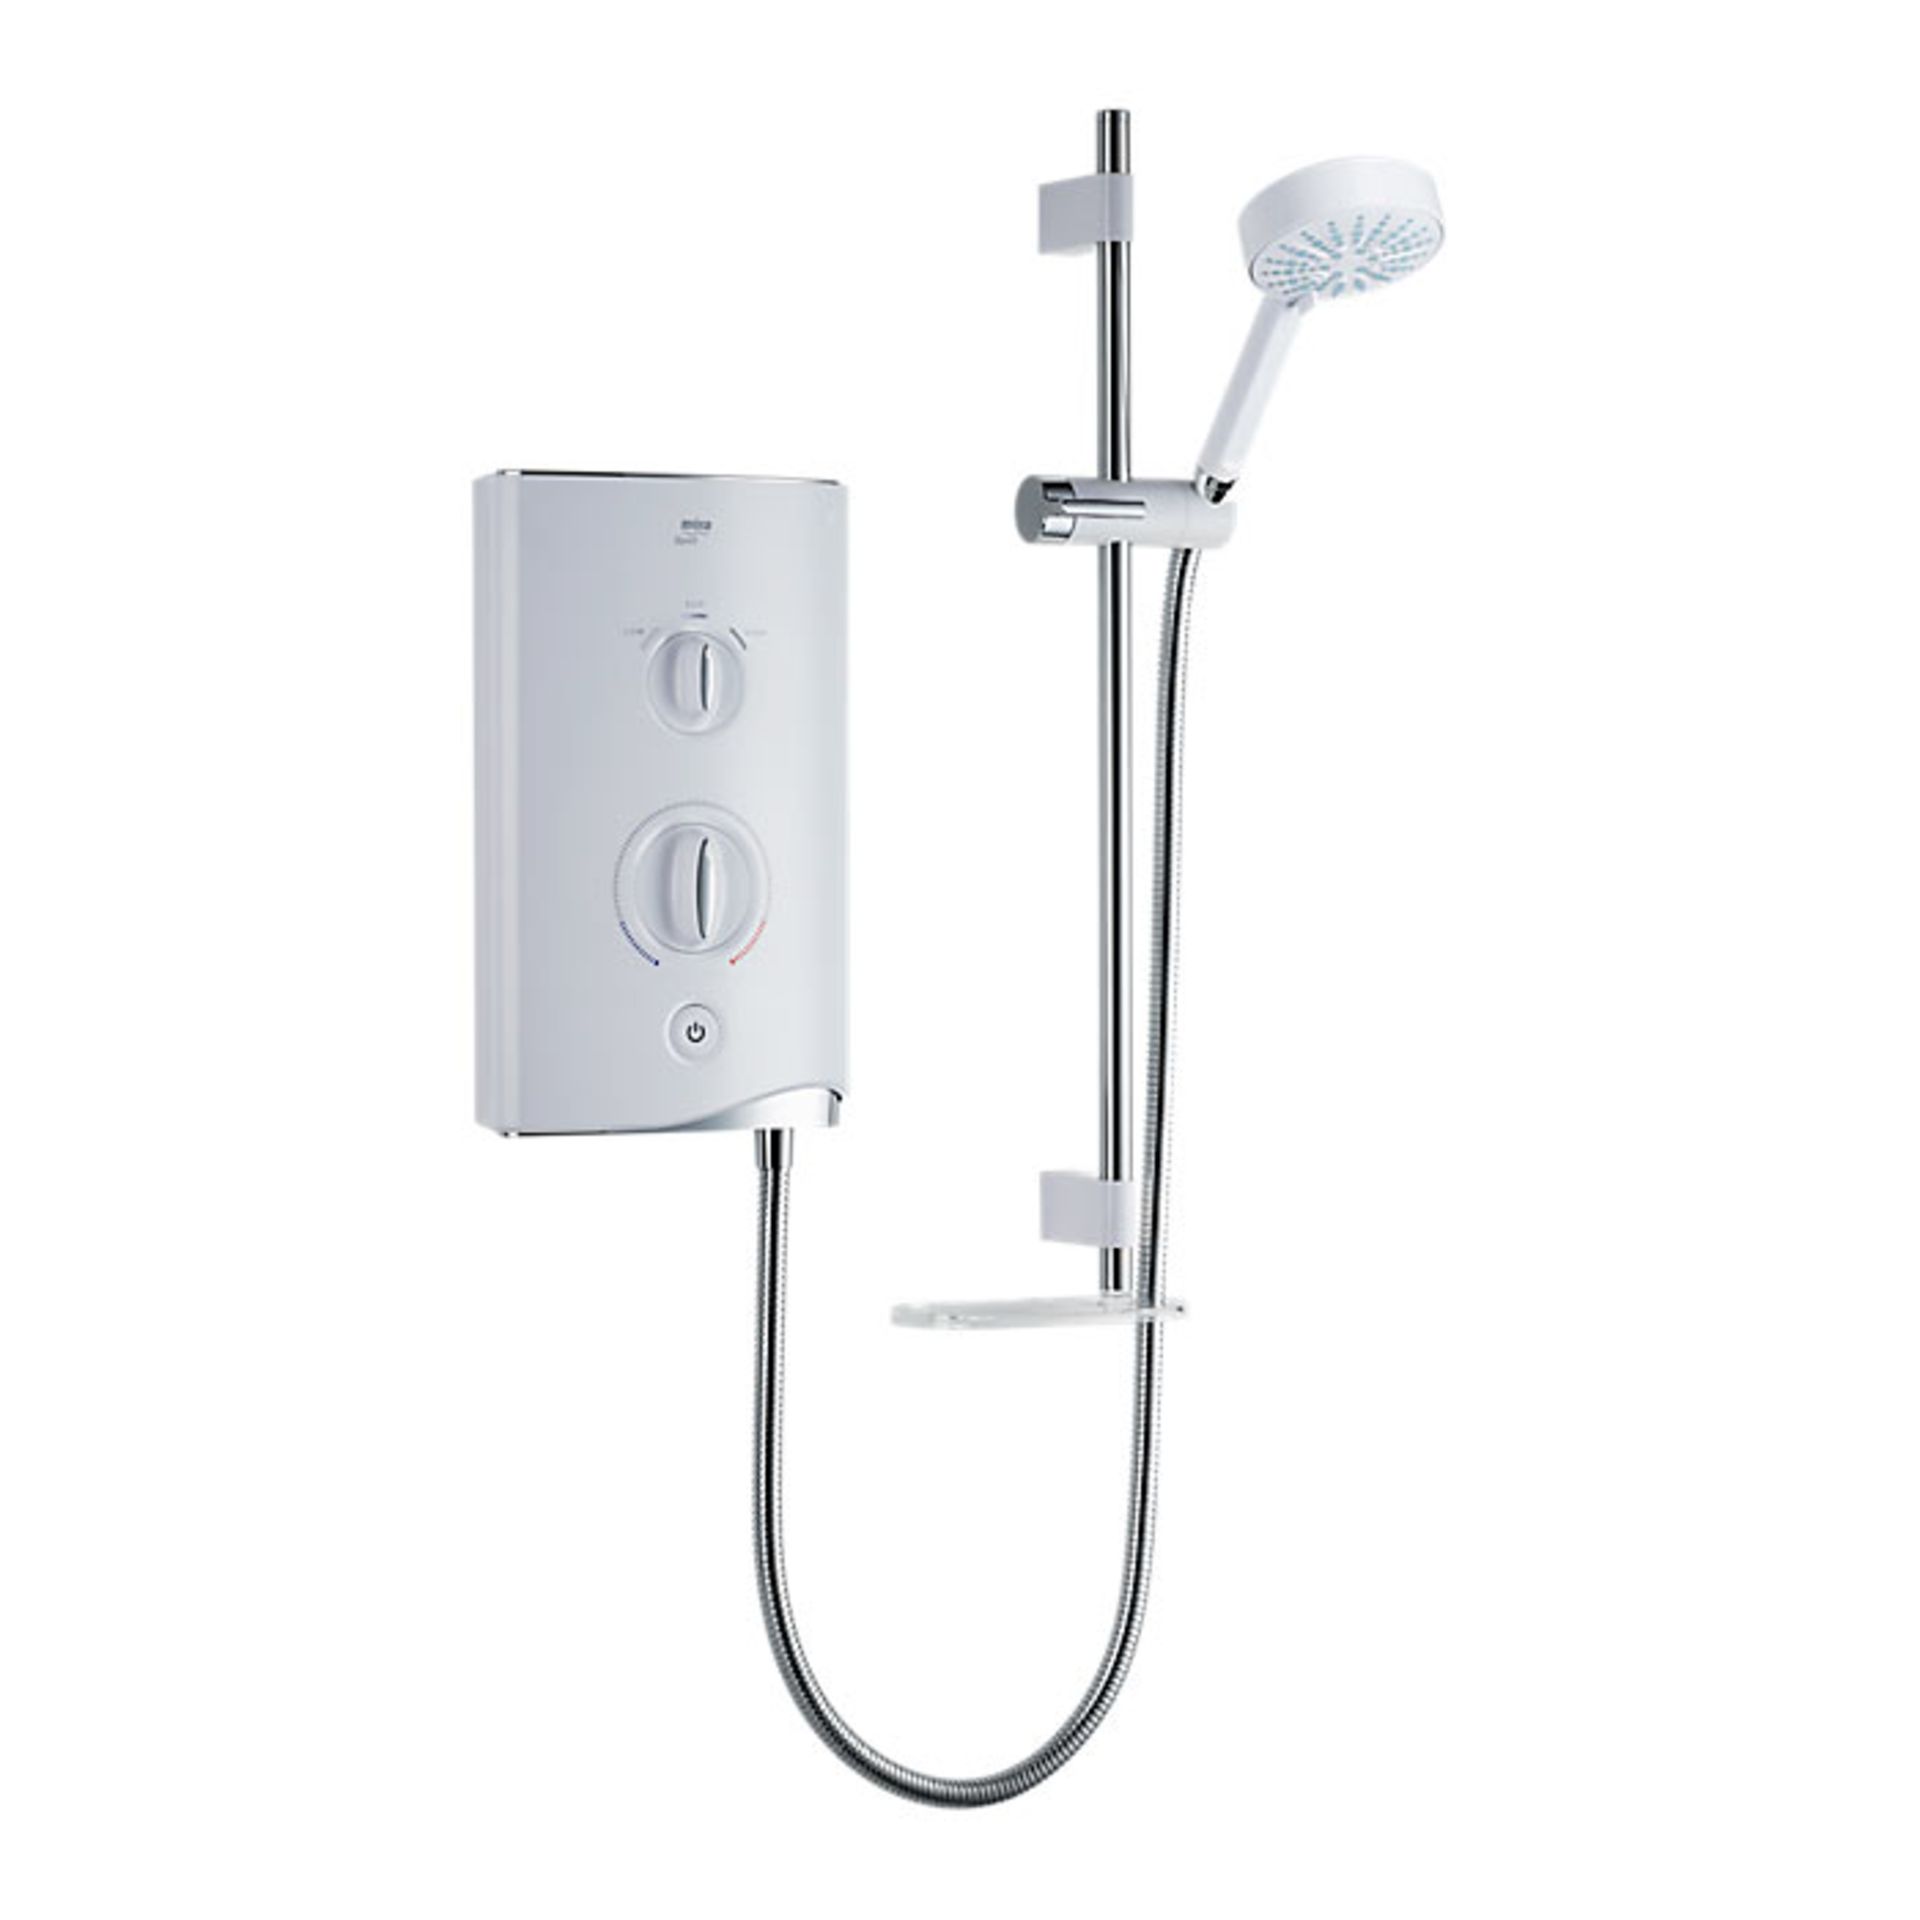 1 x Mira Sport Thermostatic White and Chrome 9.0kW Electric Shower - New Boxed Stock - RRP: £320 - Image 3 of 5